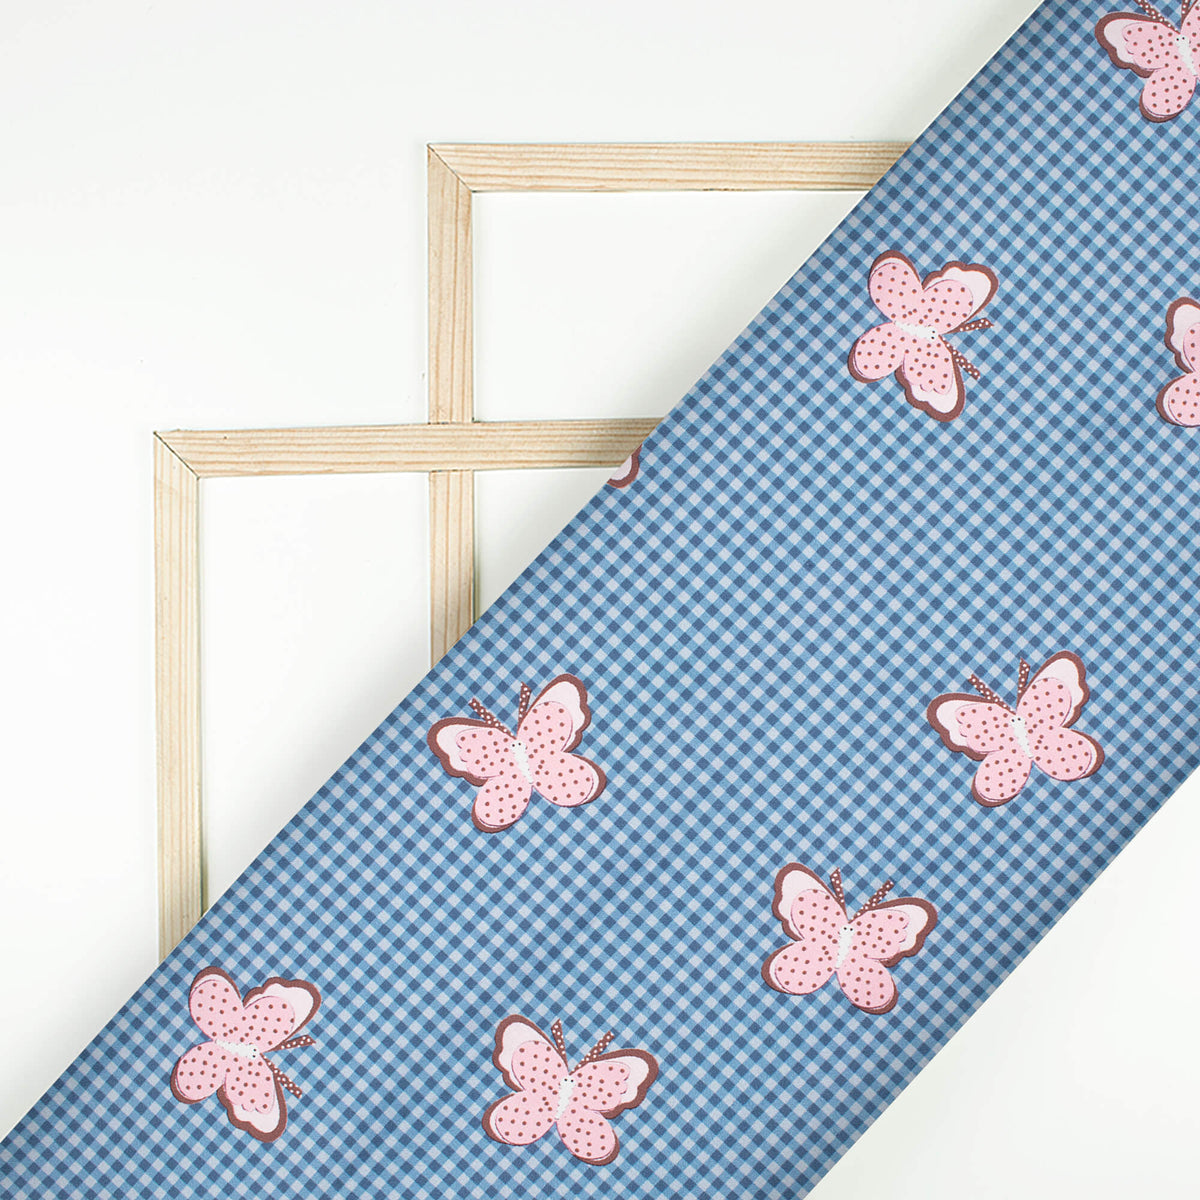 Aegean Blue And Baby Pink Butterfly Pattern Digital Print Japan Satin Fabric